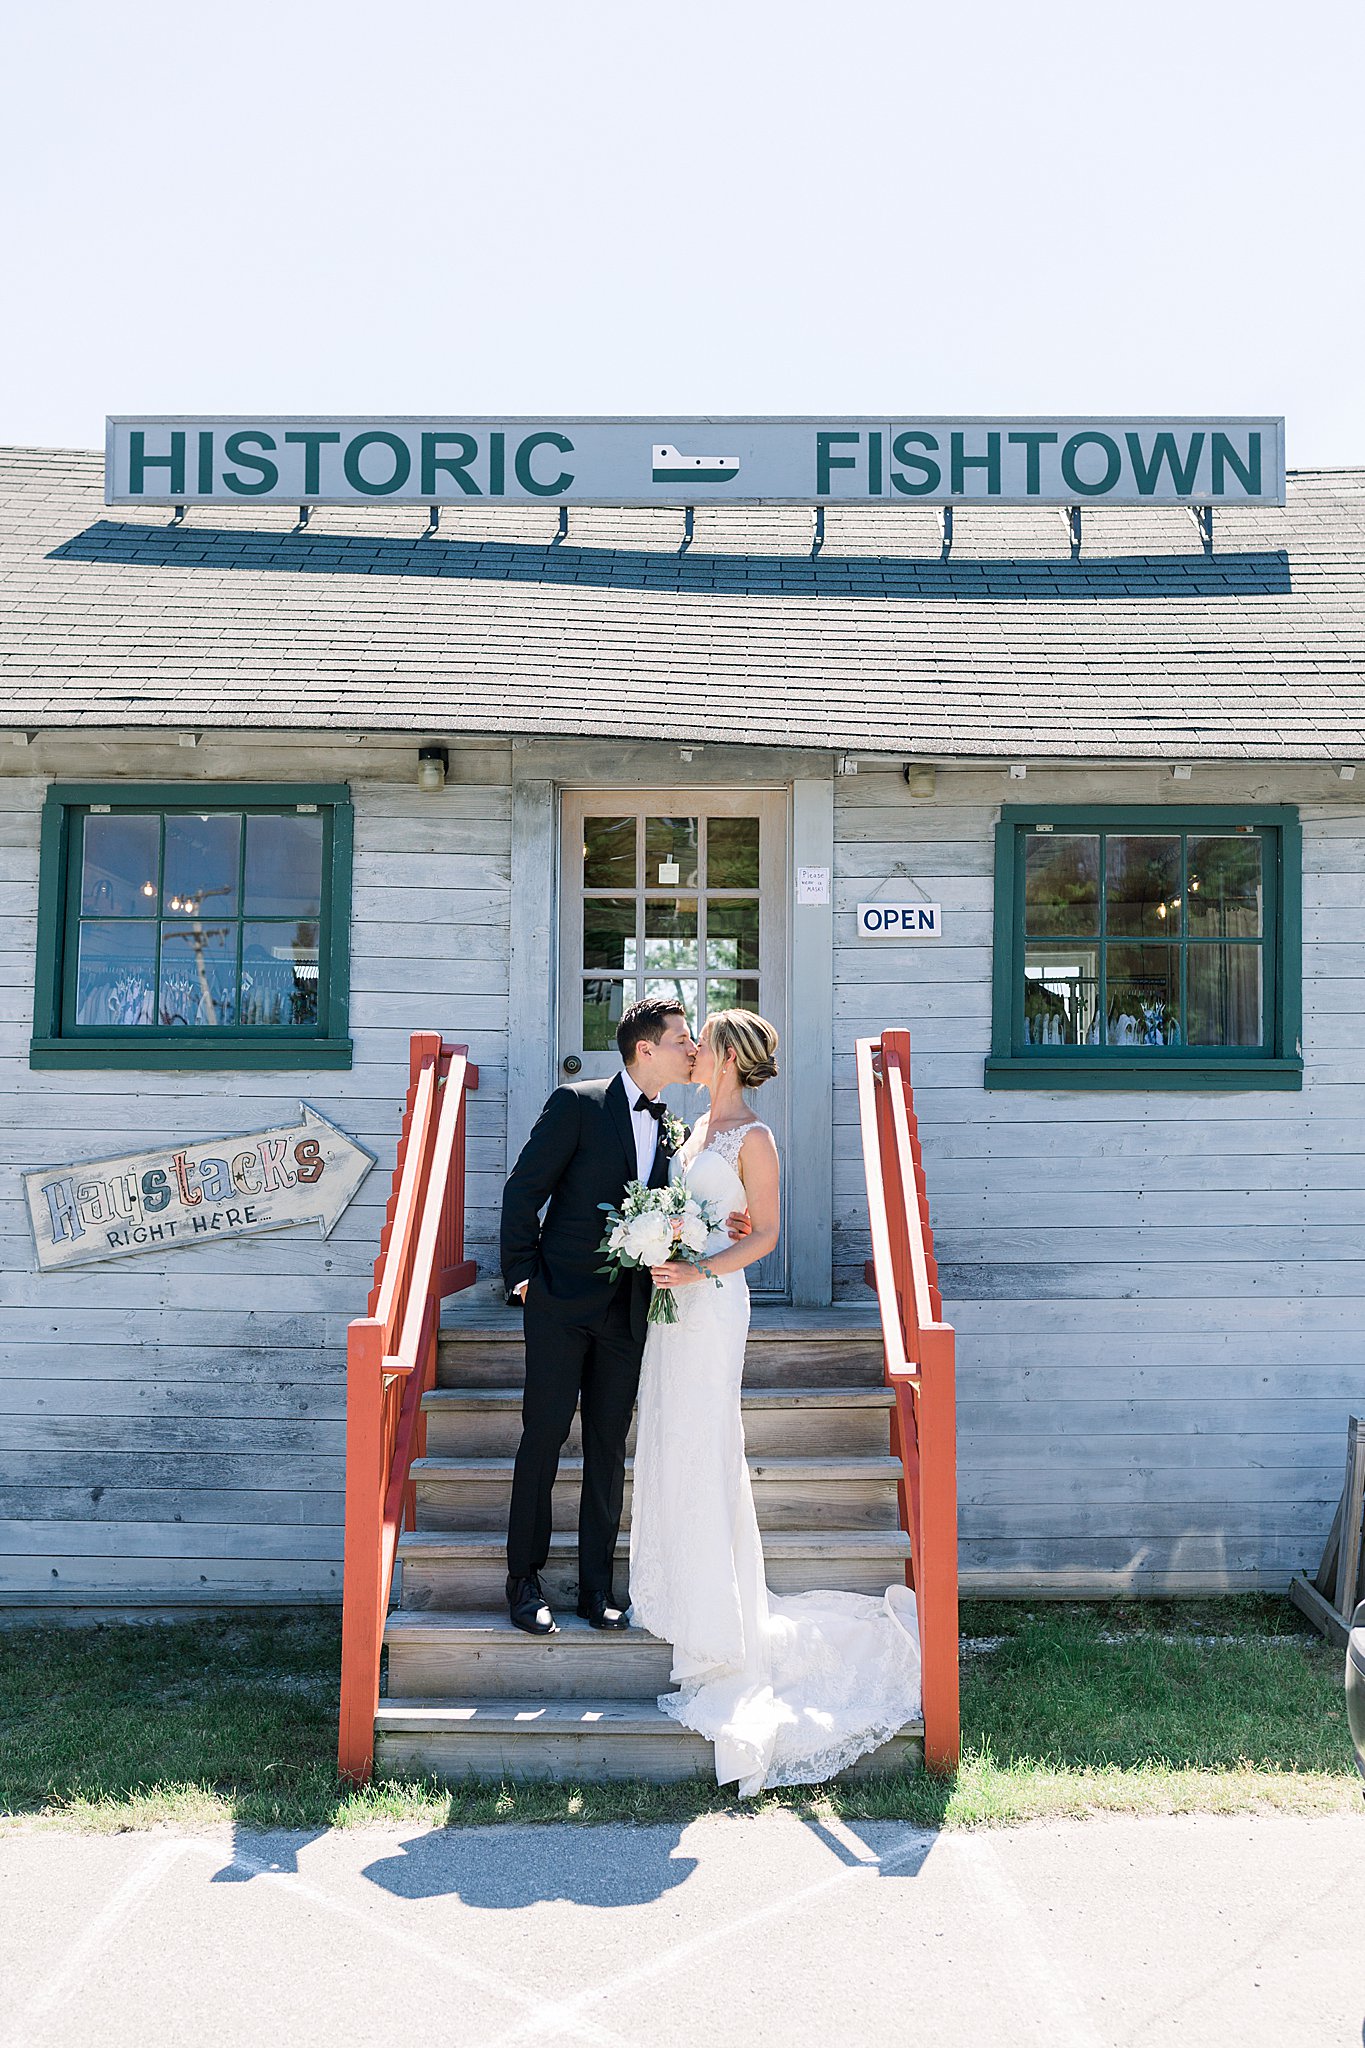 Bride and groom kiss under Historic Fishtown sign during intimate Lake Michigan wedding in Leland, Michigan.